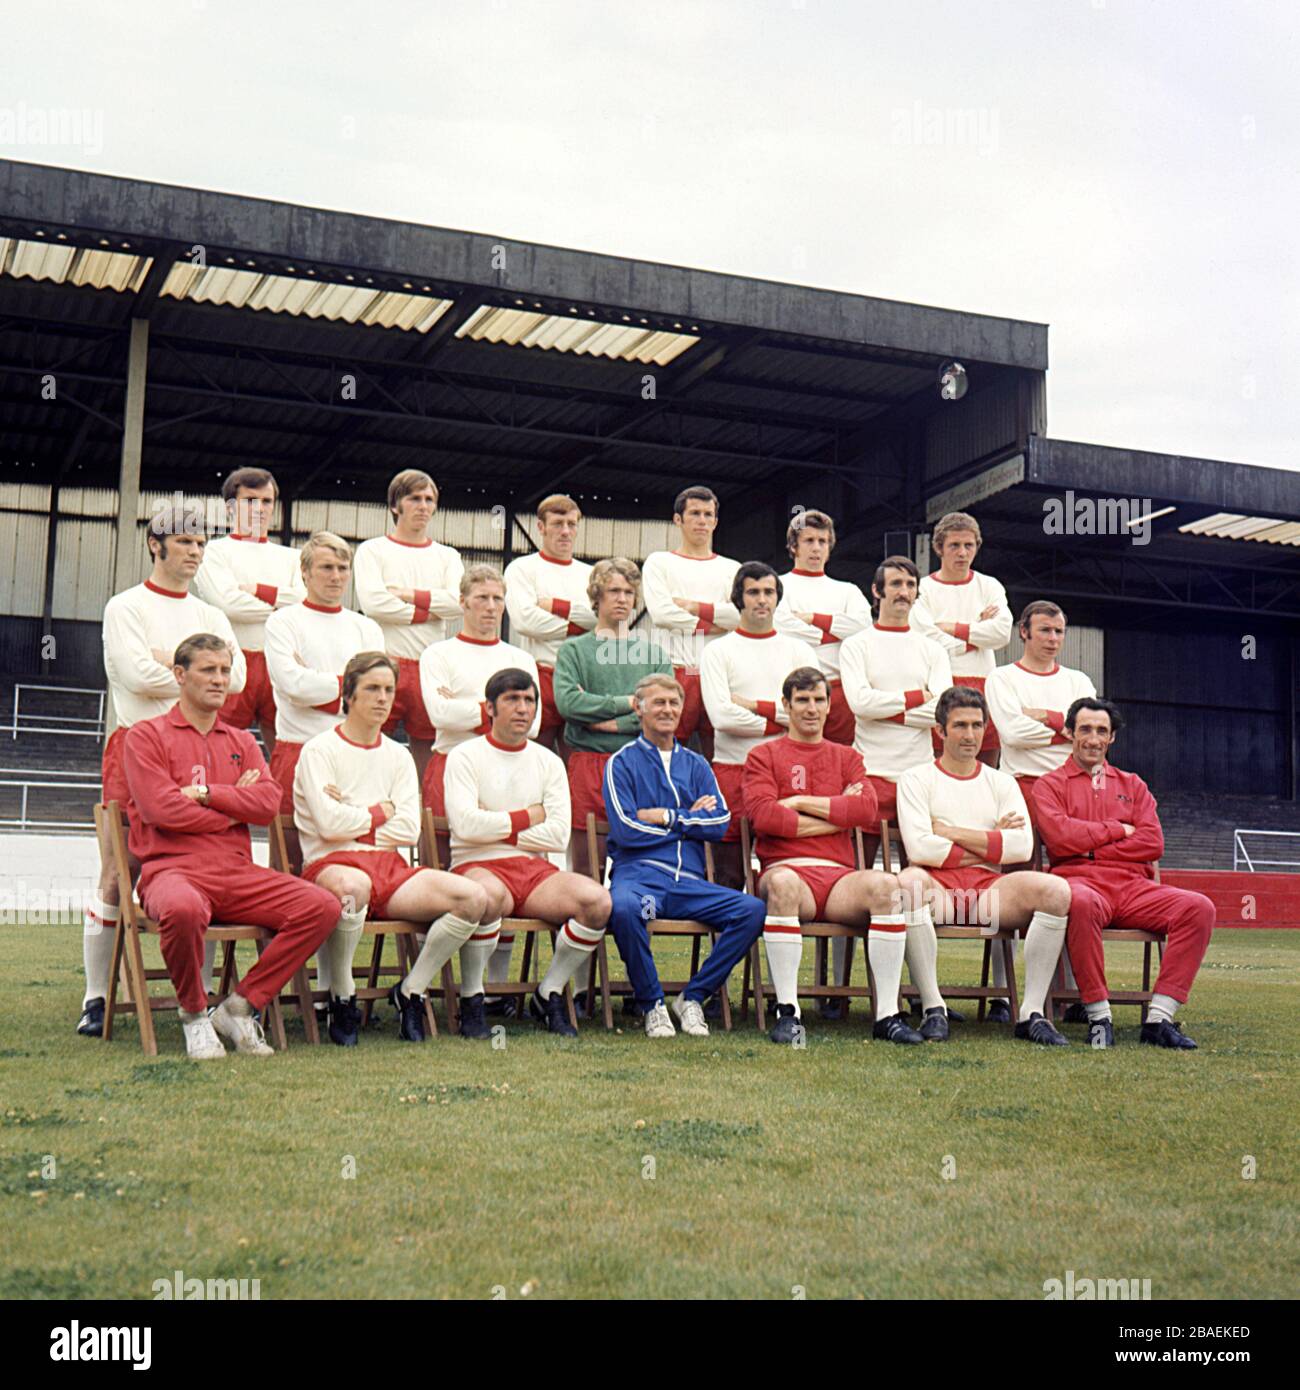 Walsall squad for the 1971-72 season. (back row l-r) Nick Atthey, Bobby Gough, Colin Taylor, Colin Harrison, Geoff Morris and Ray Train. (middle row l-r) John Manning, Stan Bennett, Frank Gregg, Blackmore, Mick Evans, John Woodward and Willie Penman. (font row l-r) John Harris (Assistant Trainer), Brian Taylor, John Smith (captain), Bill Moore (manager), Wesson, Stan Jones and McEwan (trainer). Stock Photo